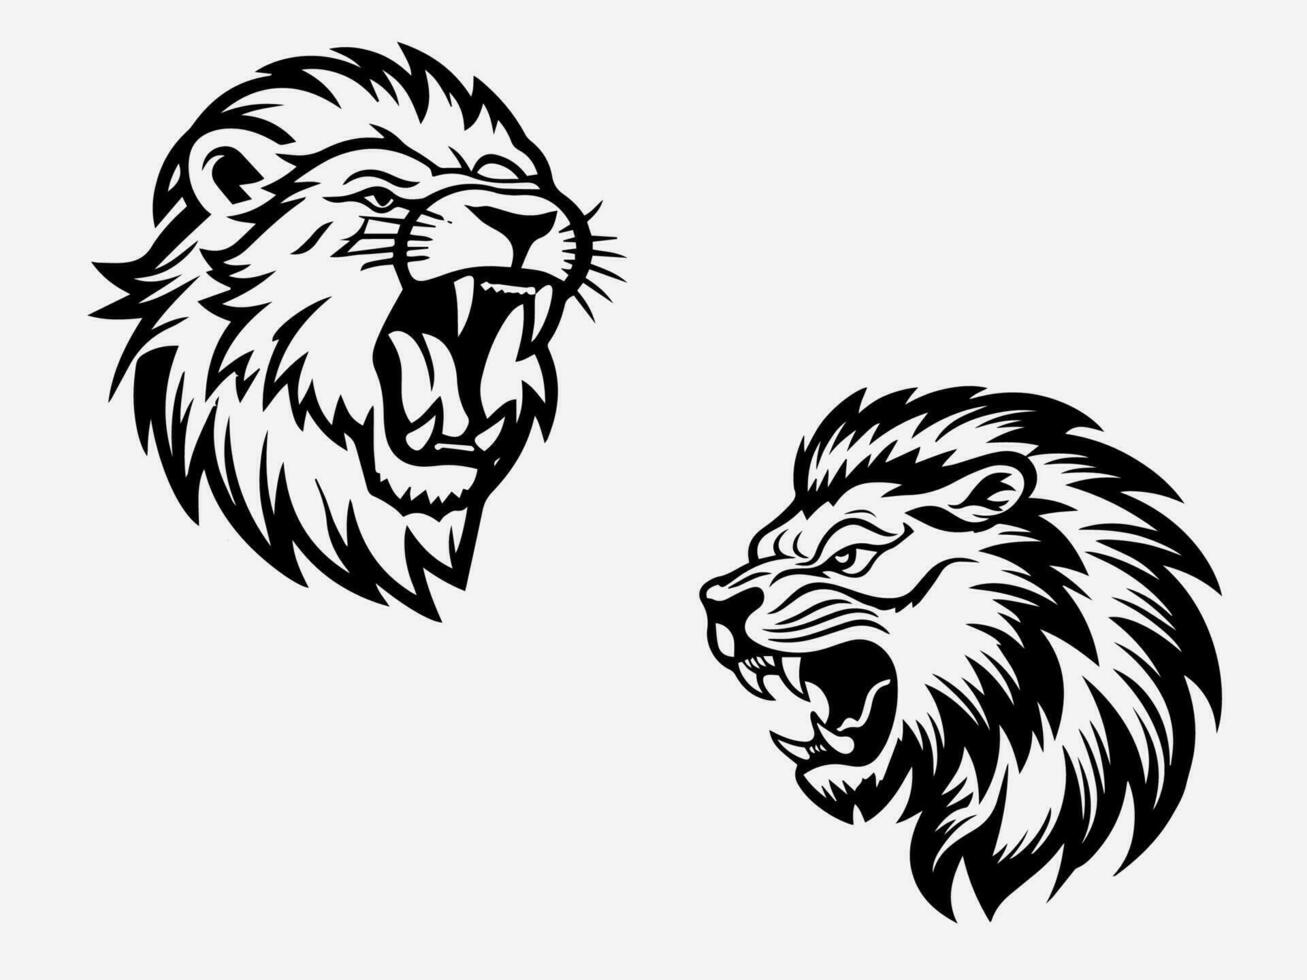 Captivating hand drawn lion logo design illustration, representing courage, majesty, and the spirit of the wild vector